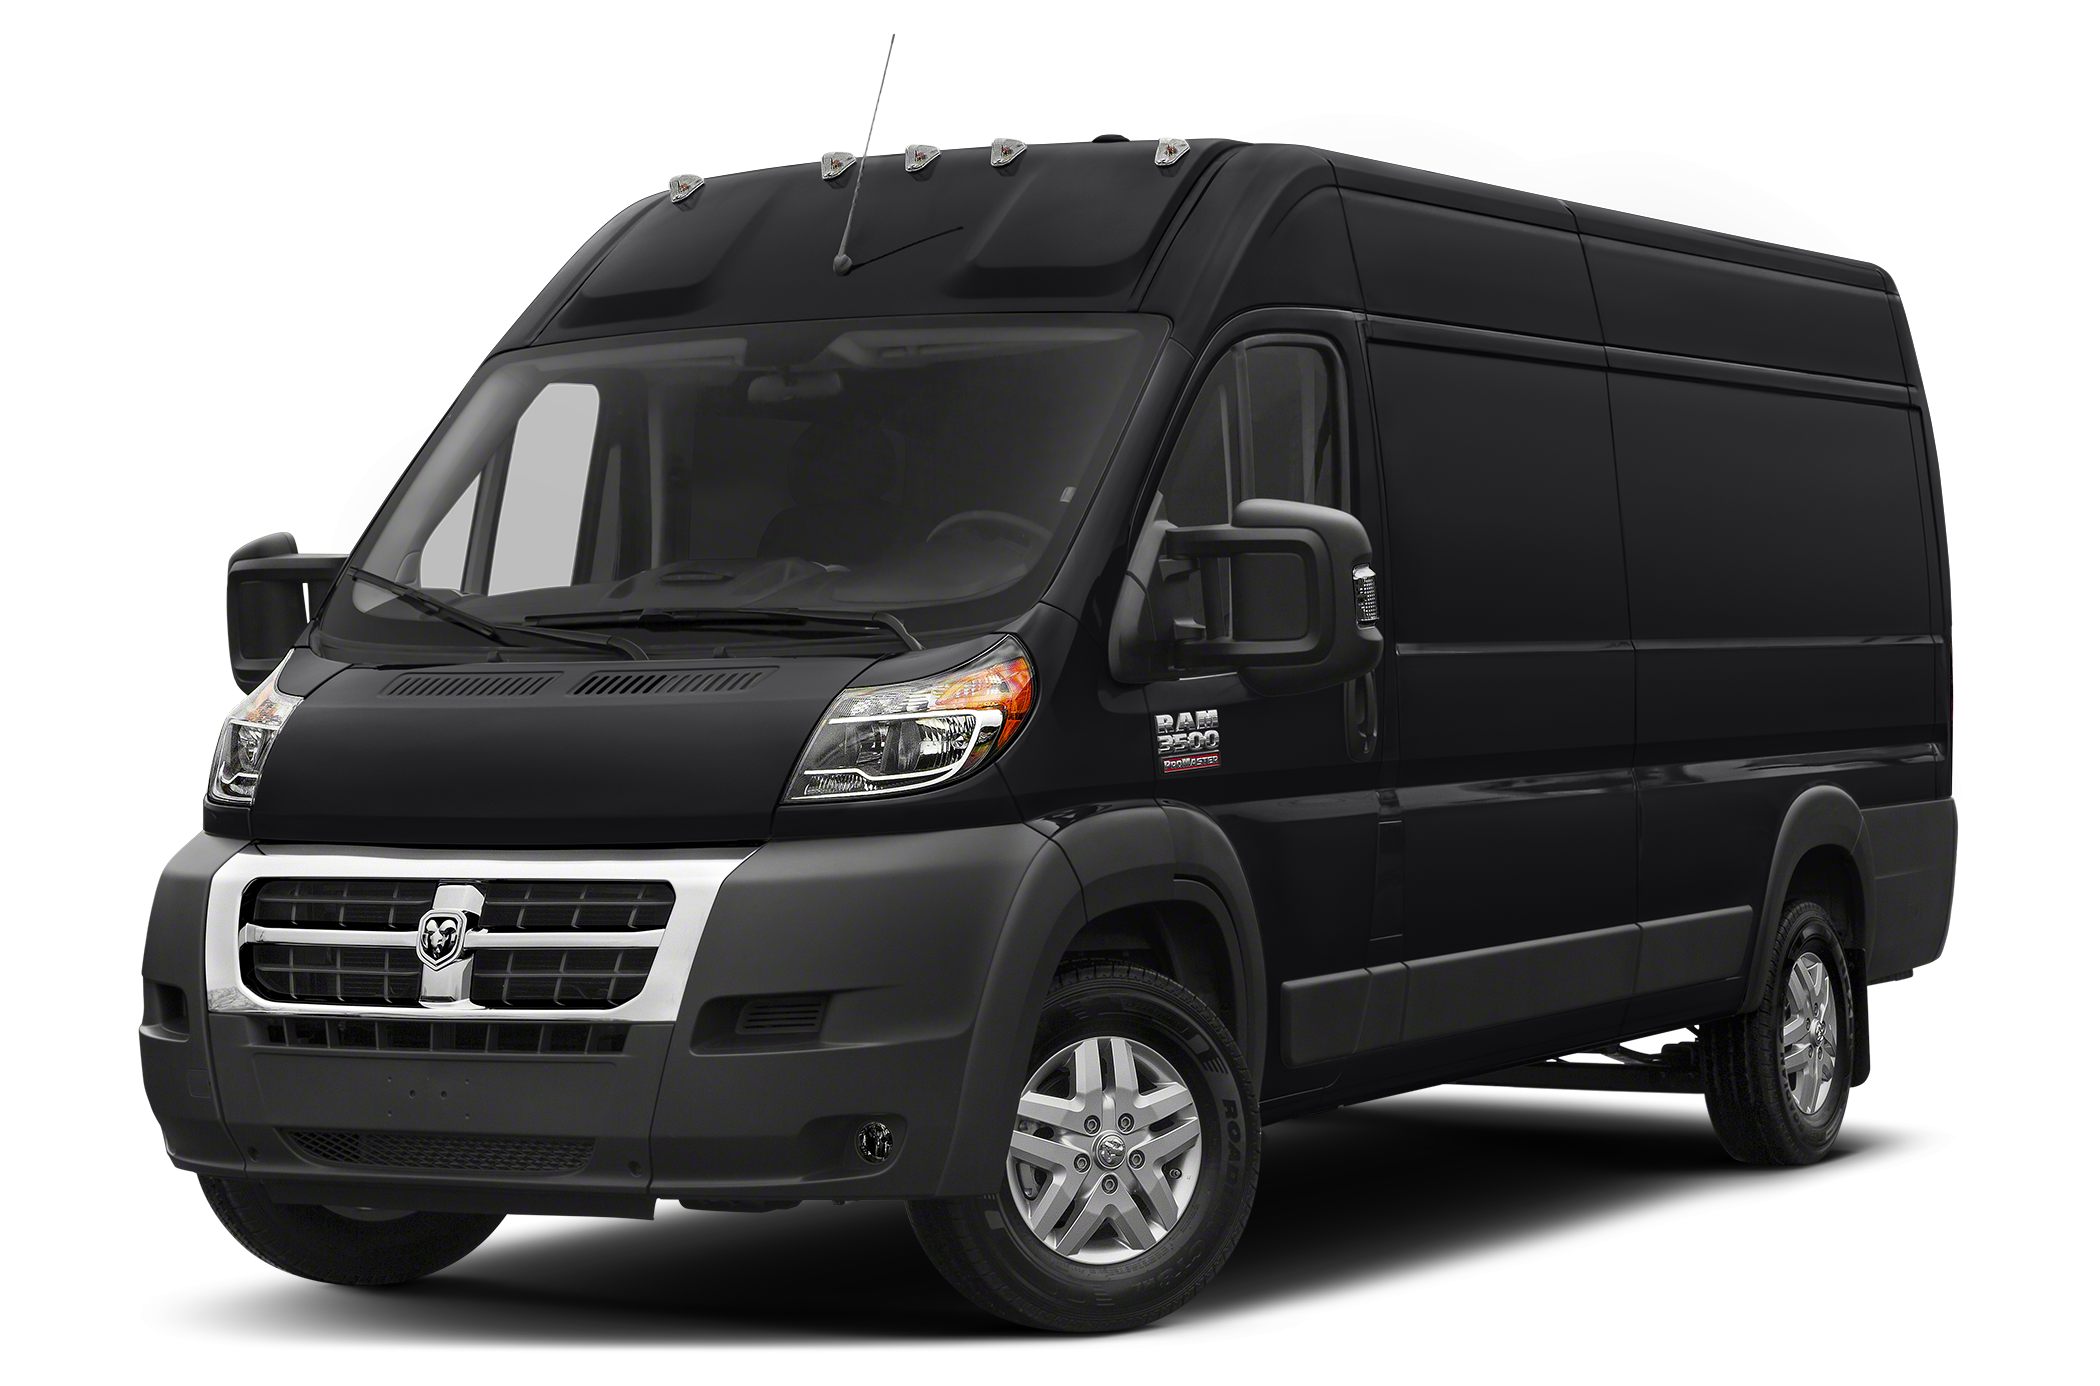 2018 Ram Promaster-3500 oem parts and accessories on sale